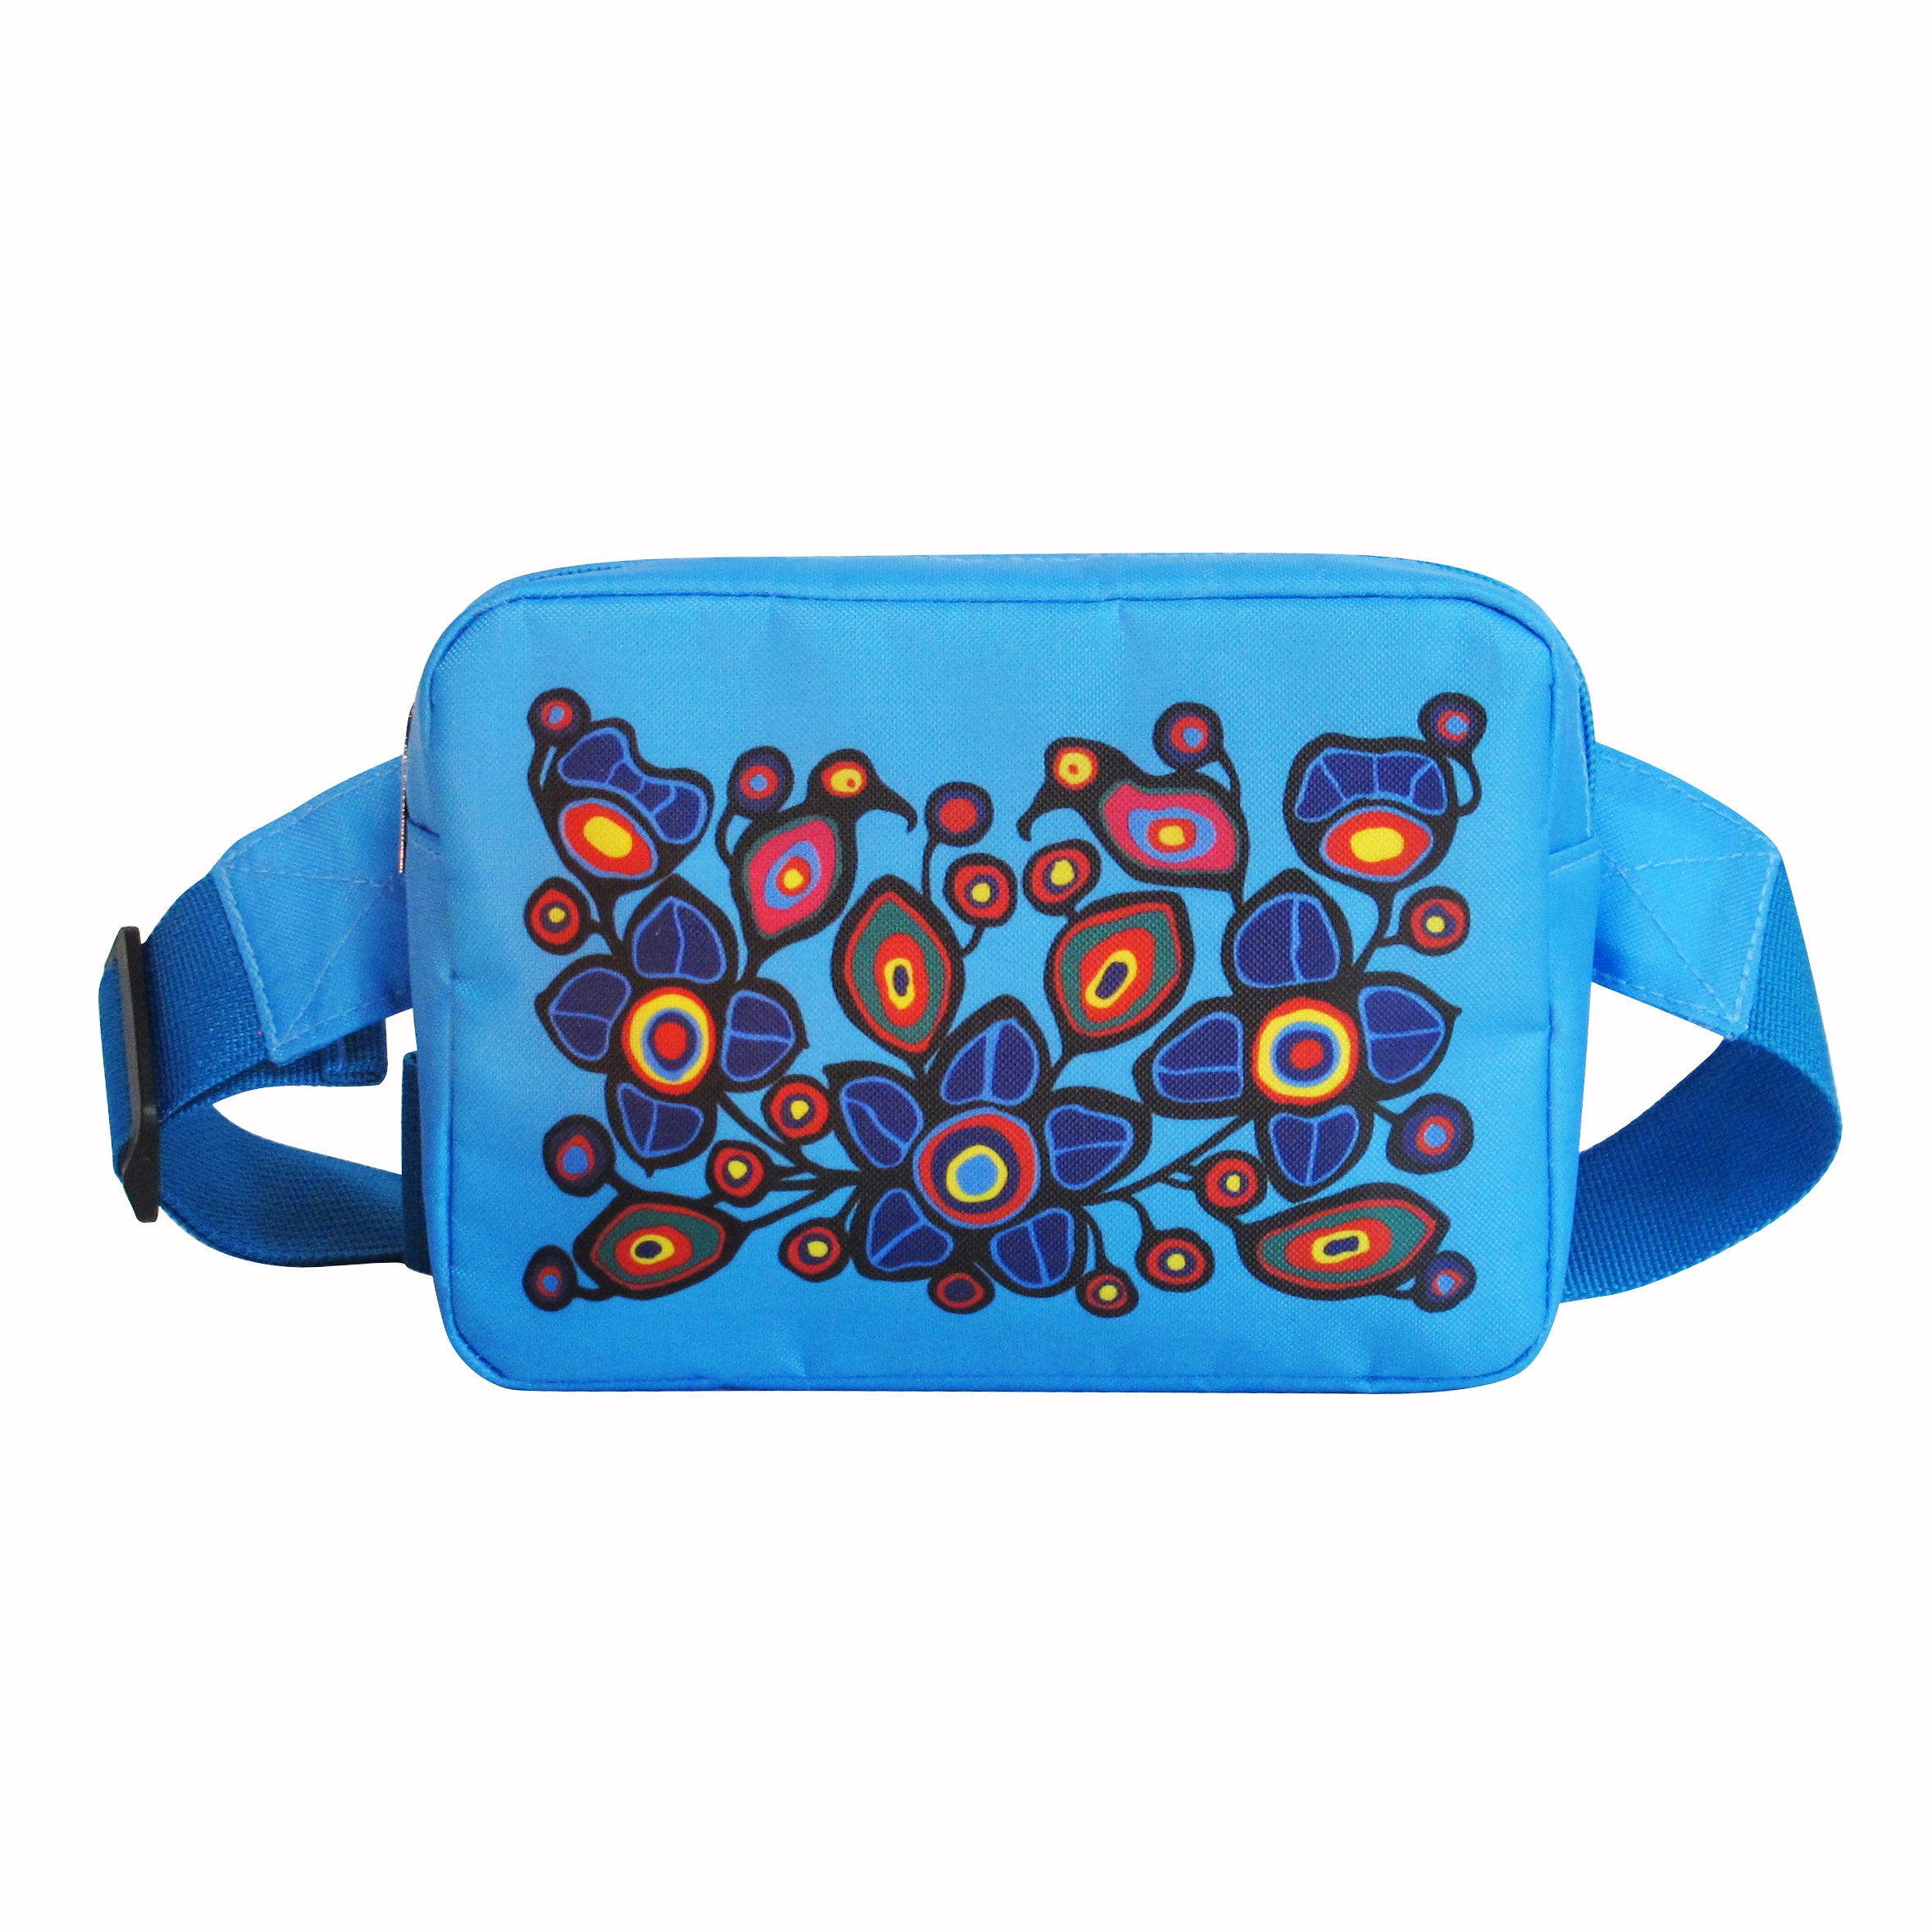 Norval Morrisseau Flowers and Birds Hip Pack